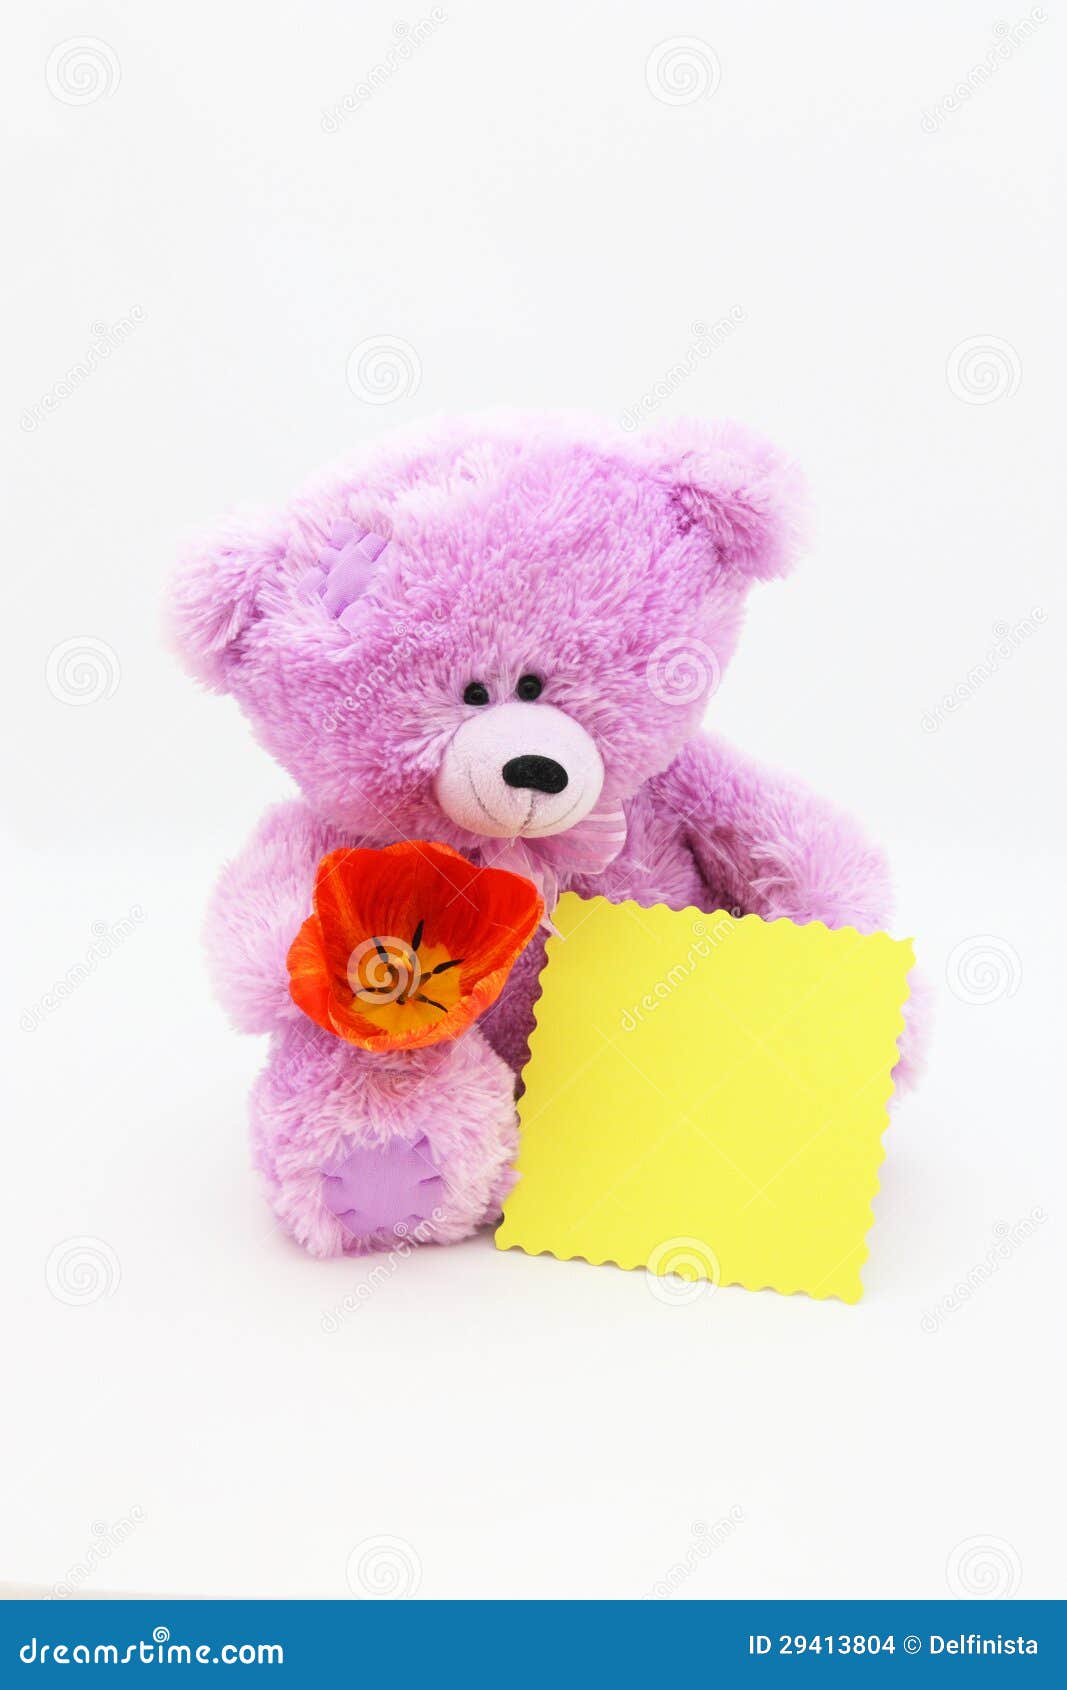 Greeting Card with Teddy Bear Stock Photo - Image of photograph ...